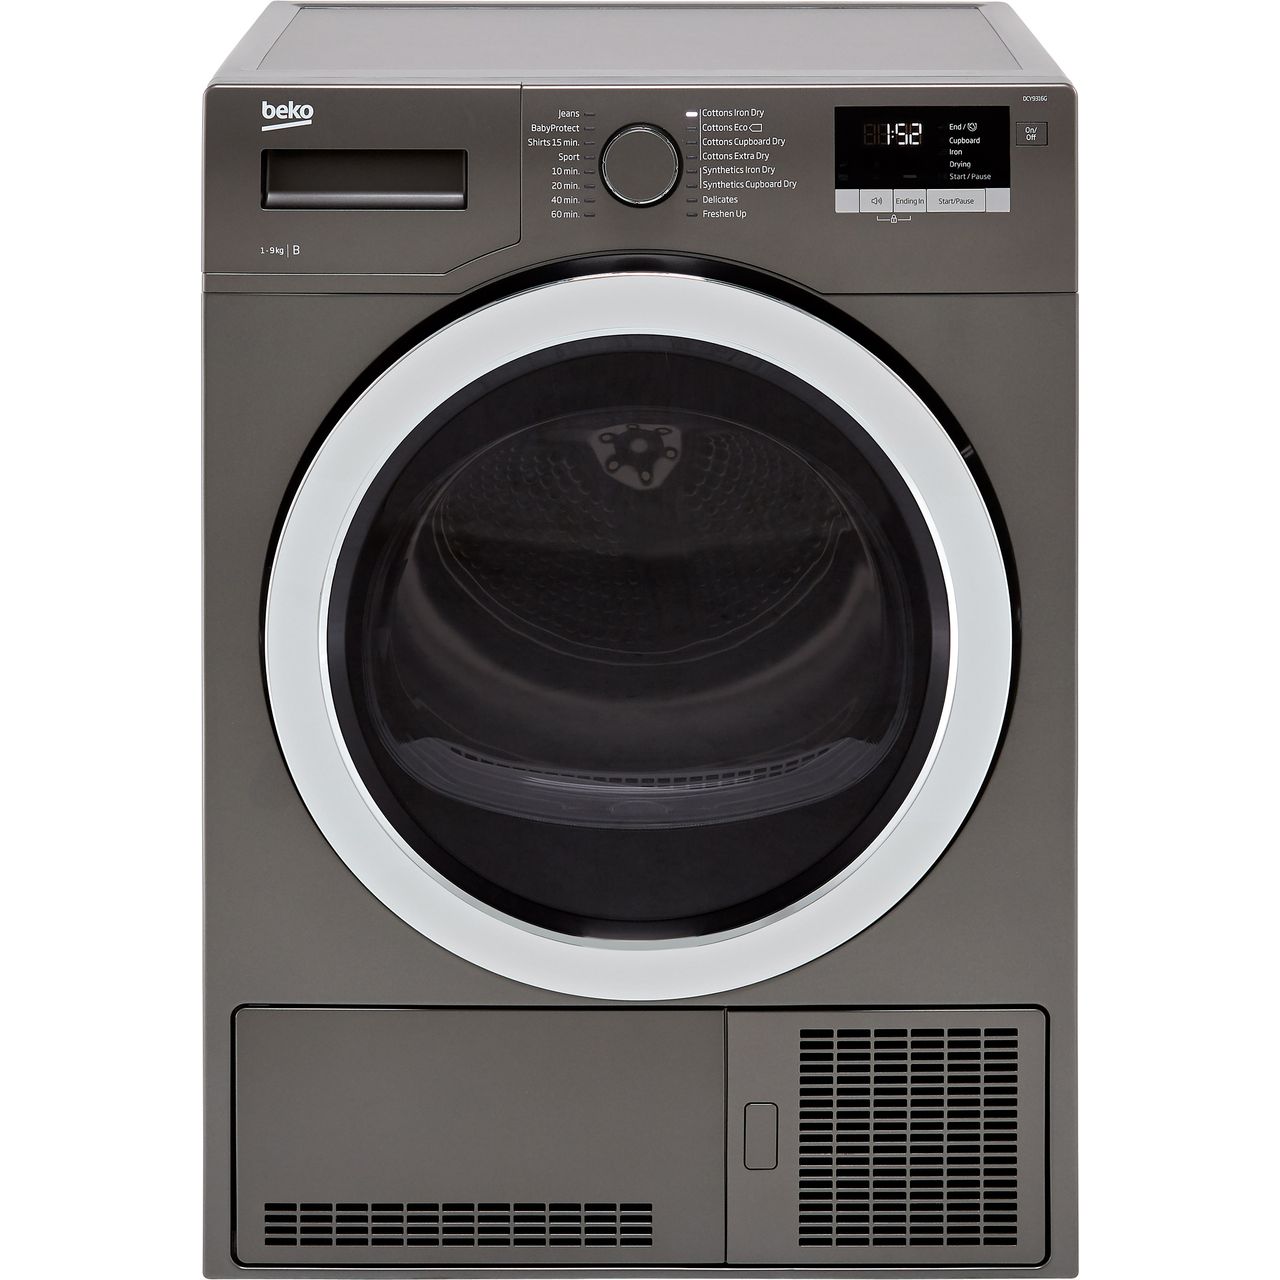 Beko DCY9316G 9Kg Condenser Tumble Dryer Review